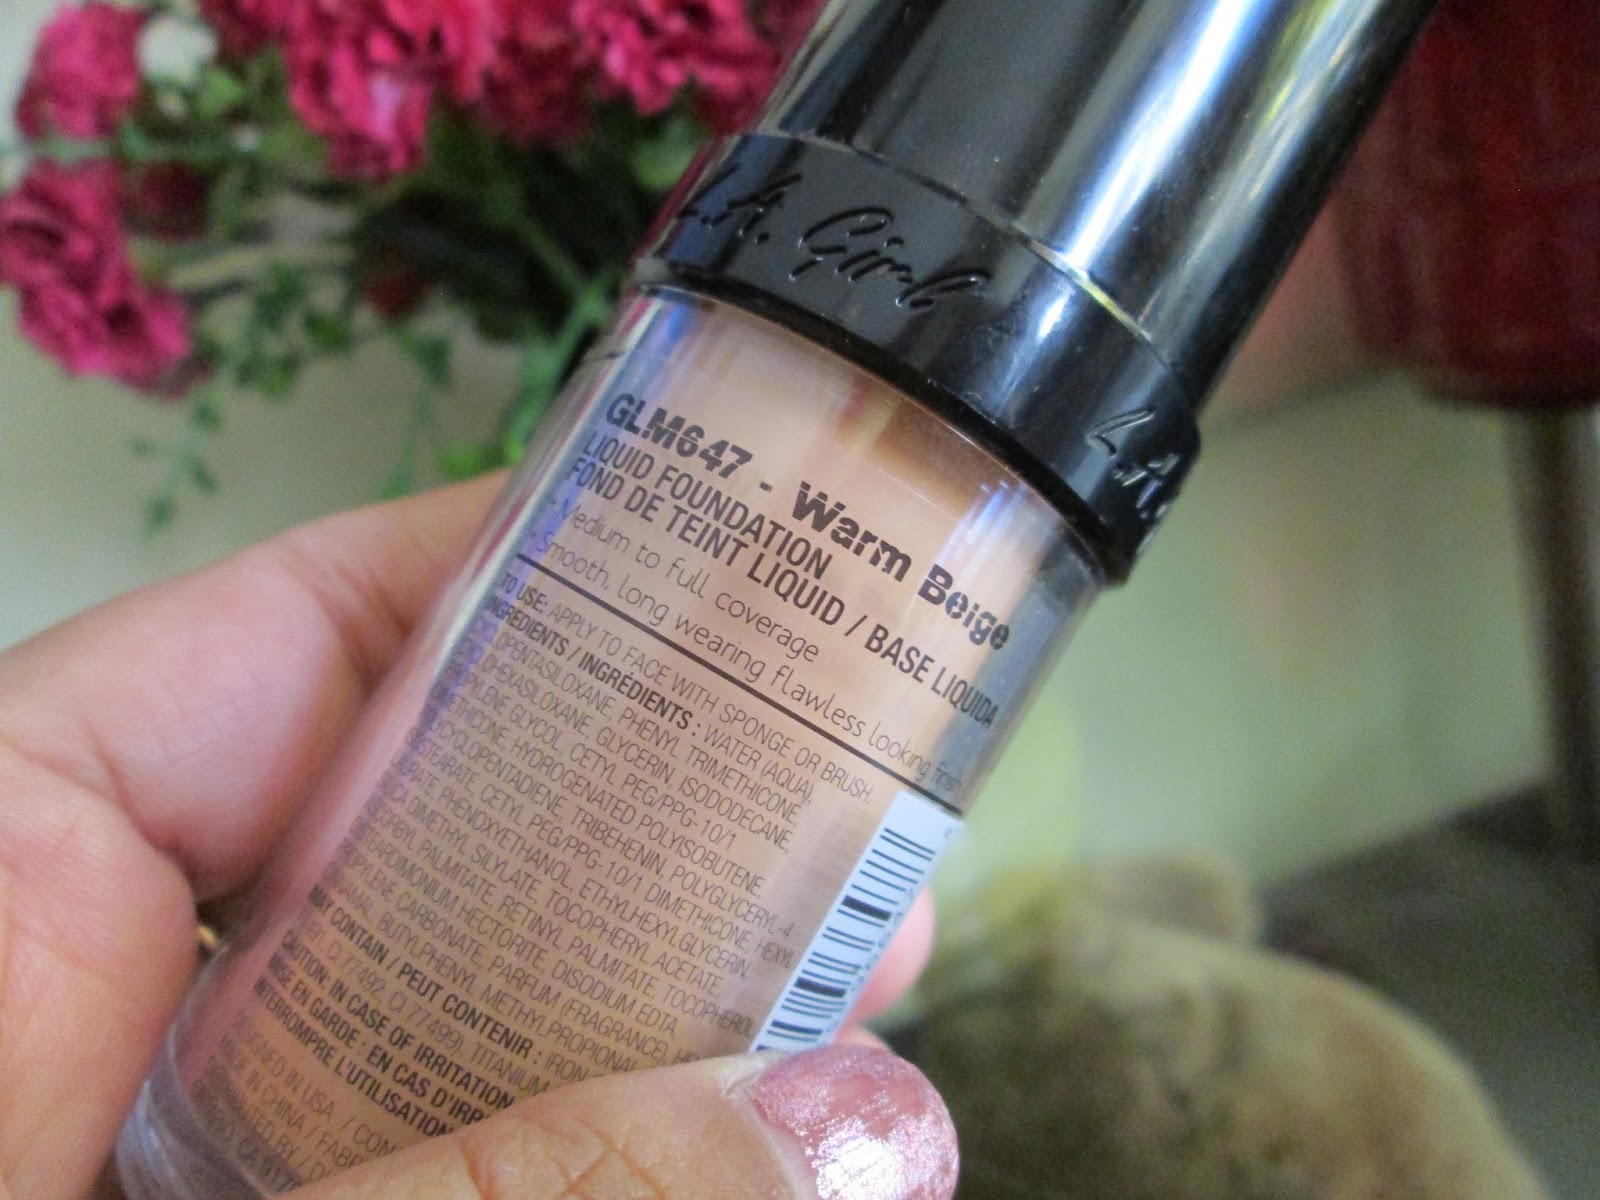 L.A Girl Pro Coverage HD Illuminating Foundation Review